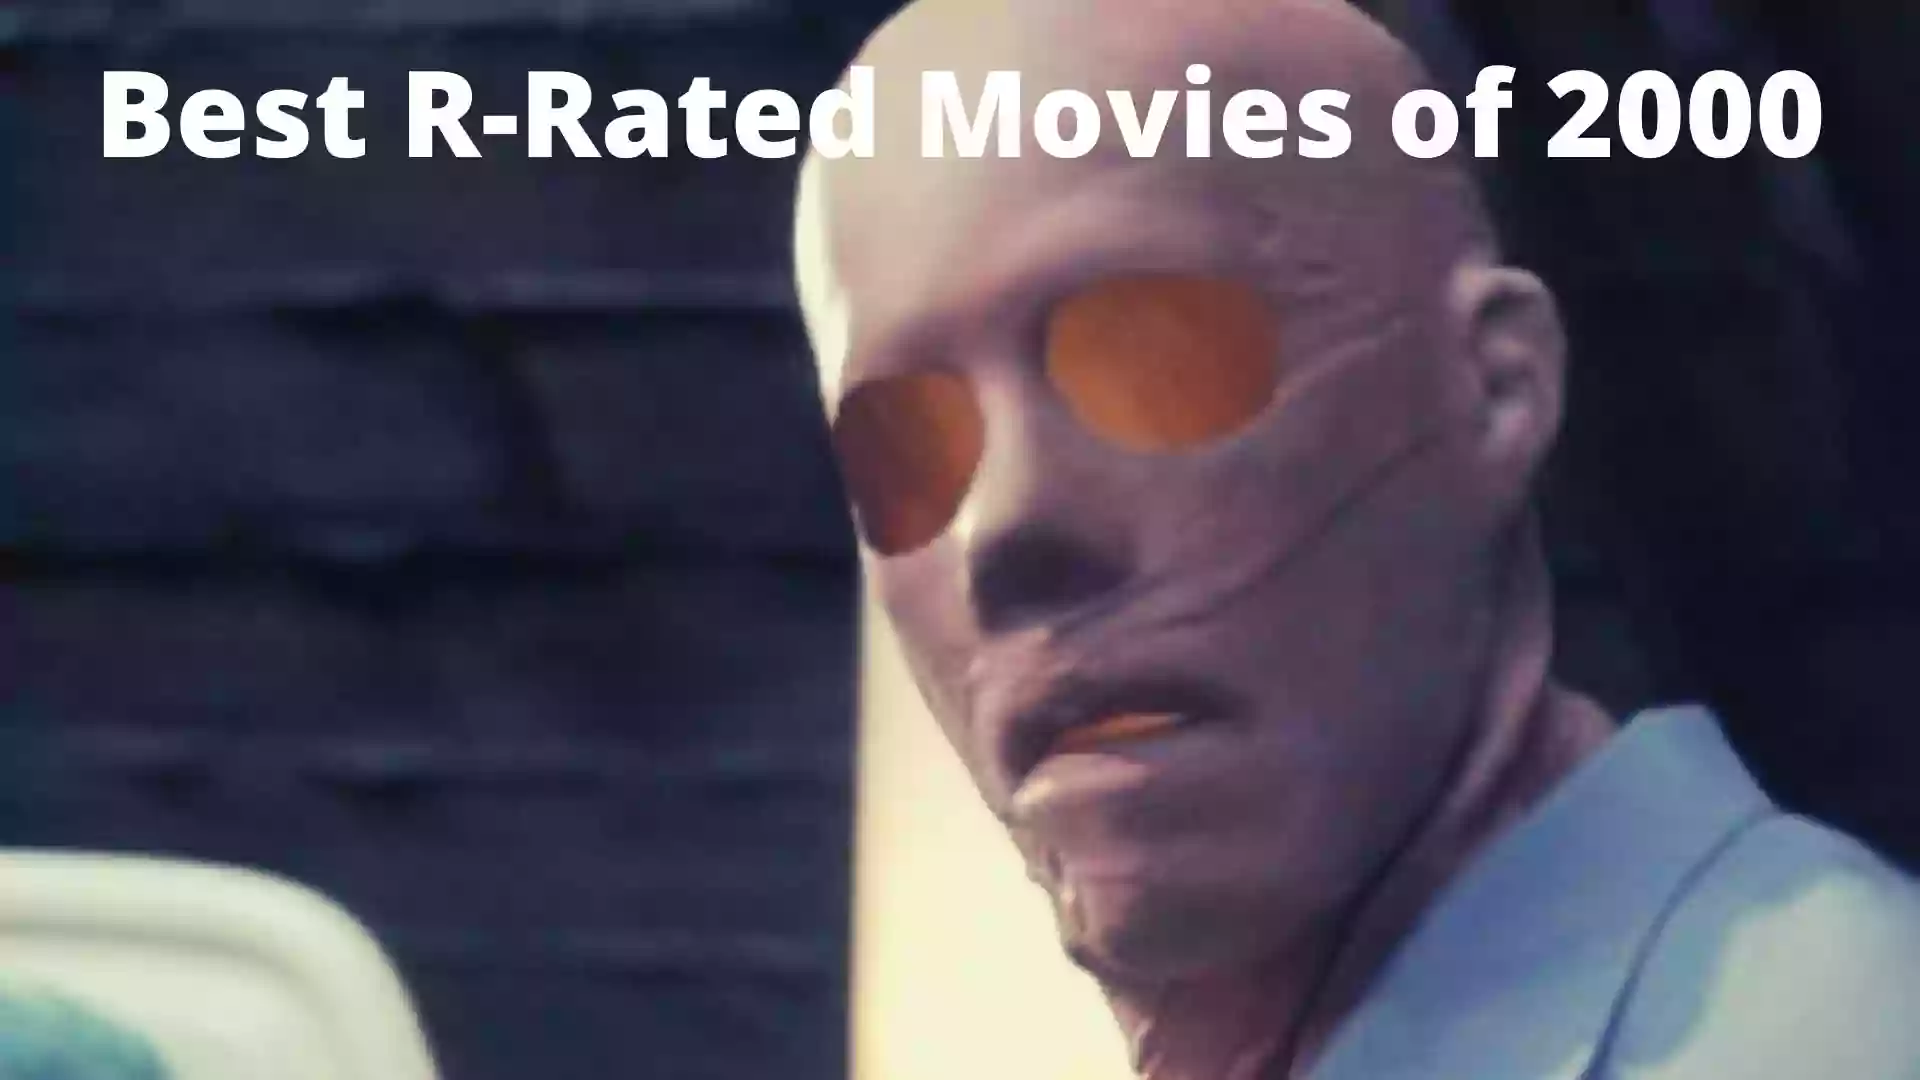 Best R-Rated Movies of 2000